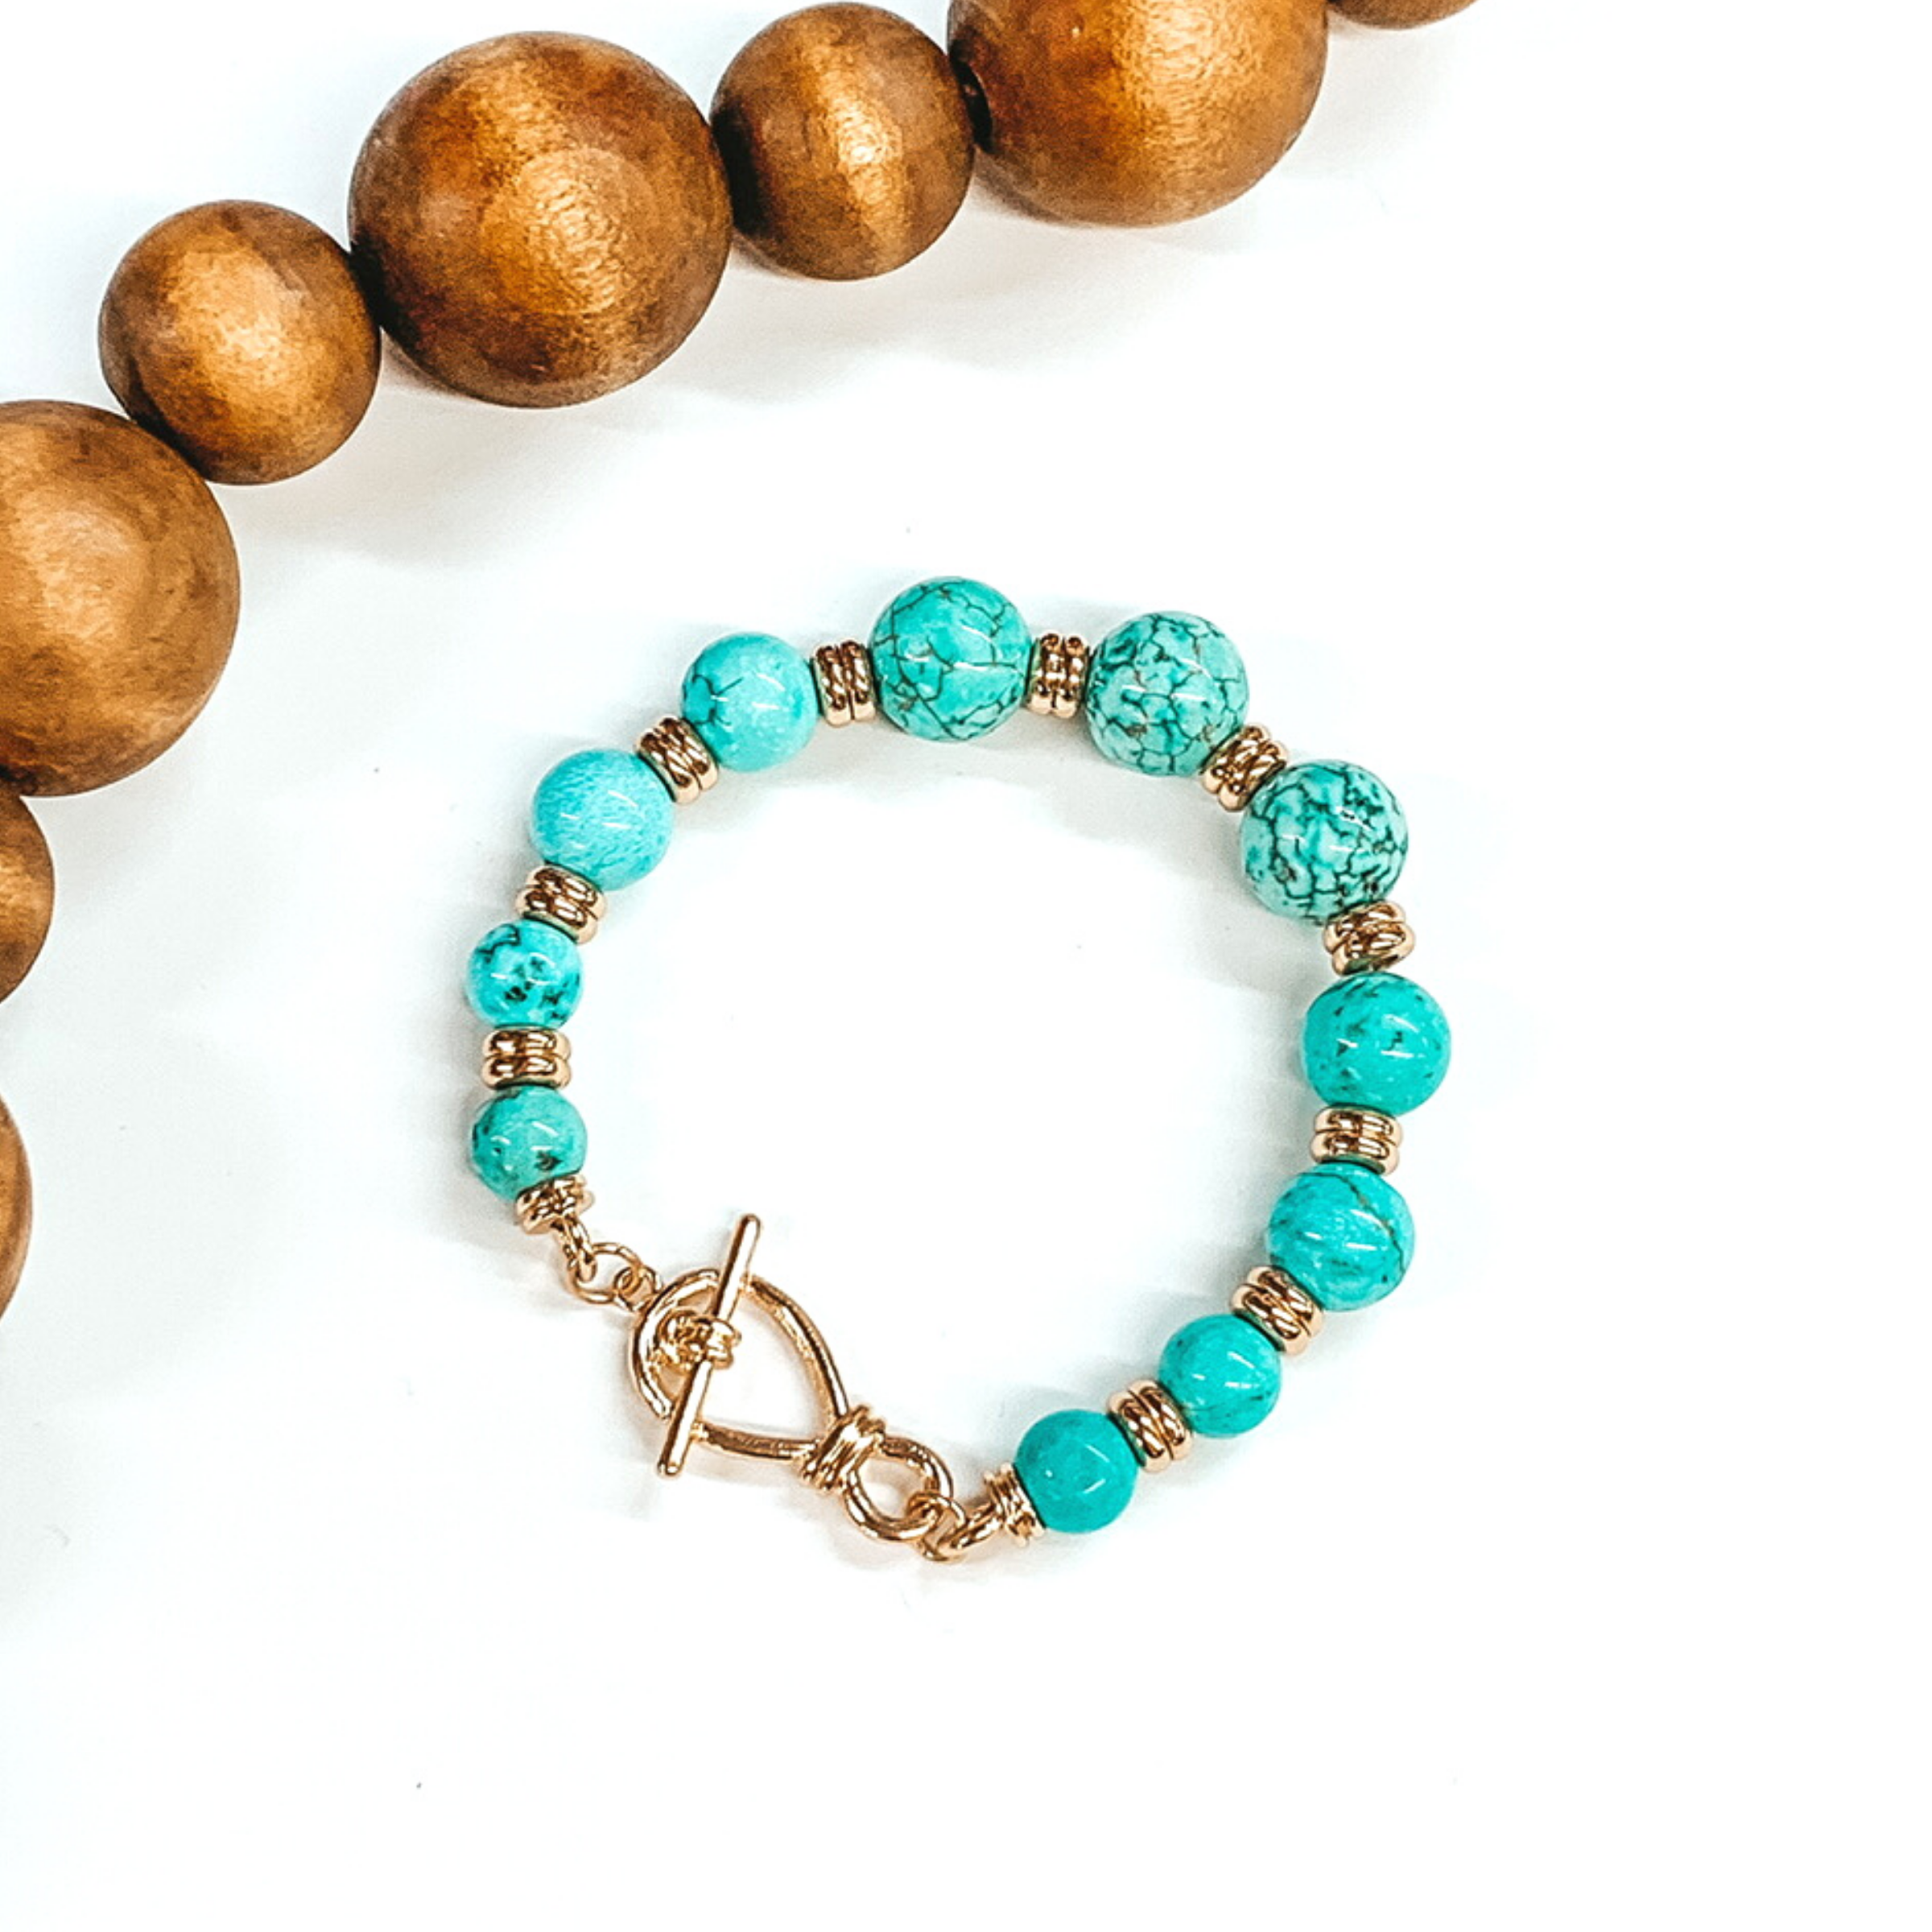 Turquoise and gold beaded bracelet with a frozen toggle clasp. This bracelet is pictured on a white background with dark brown beads at the top left corner. 